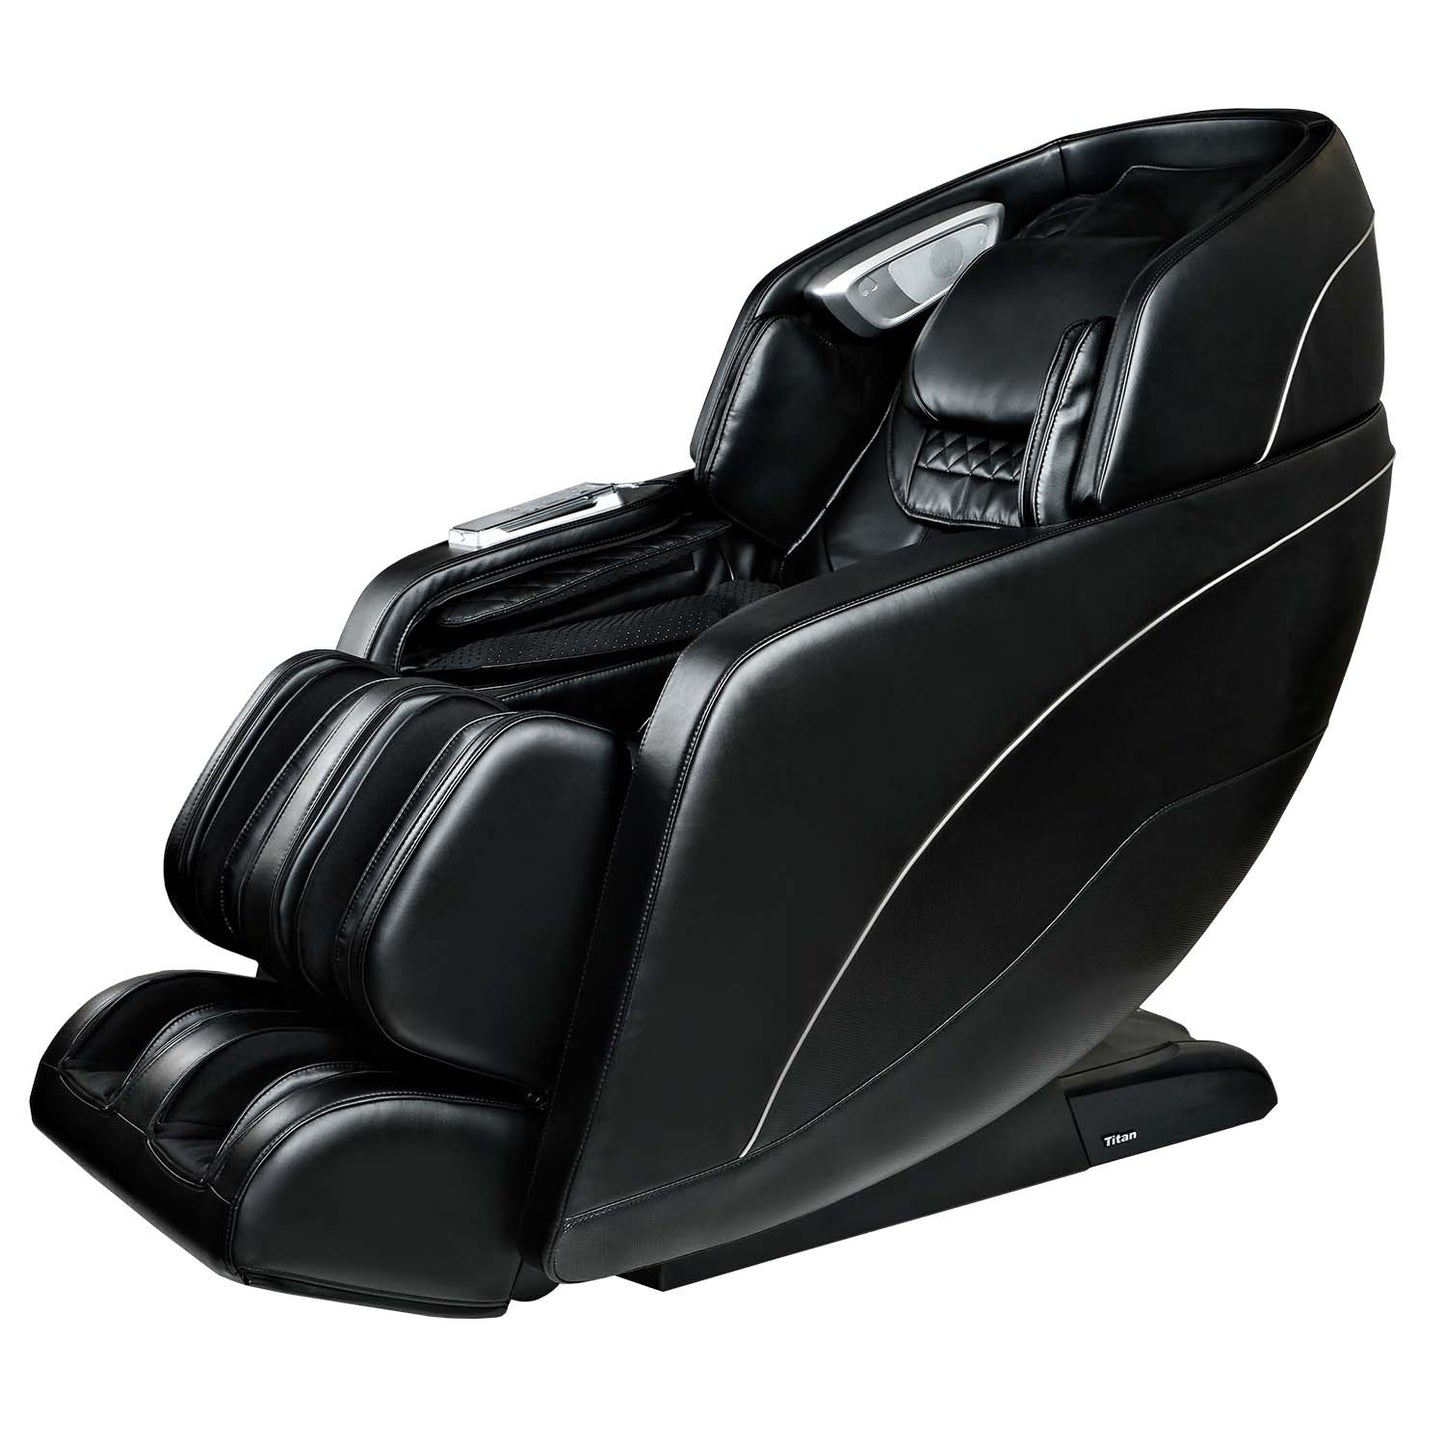 Titan Atlas LE Black / Curbside Delivery - Free / 1 Year(Parts/Labor) 2&3 Year(Parts Only) - Free titan-chair